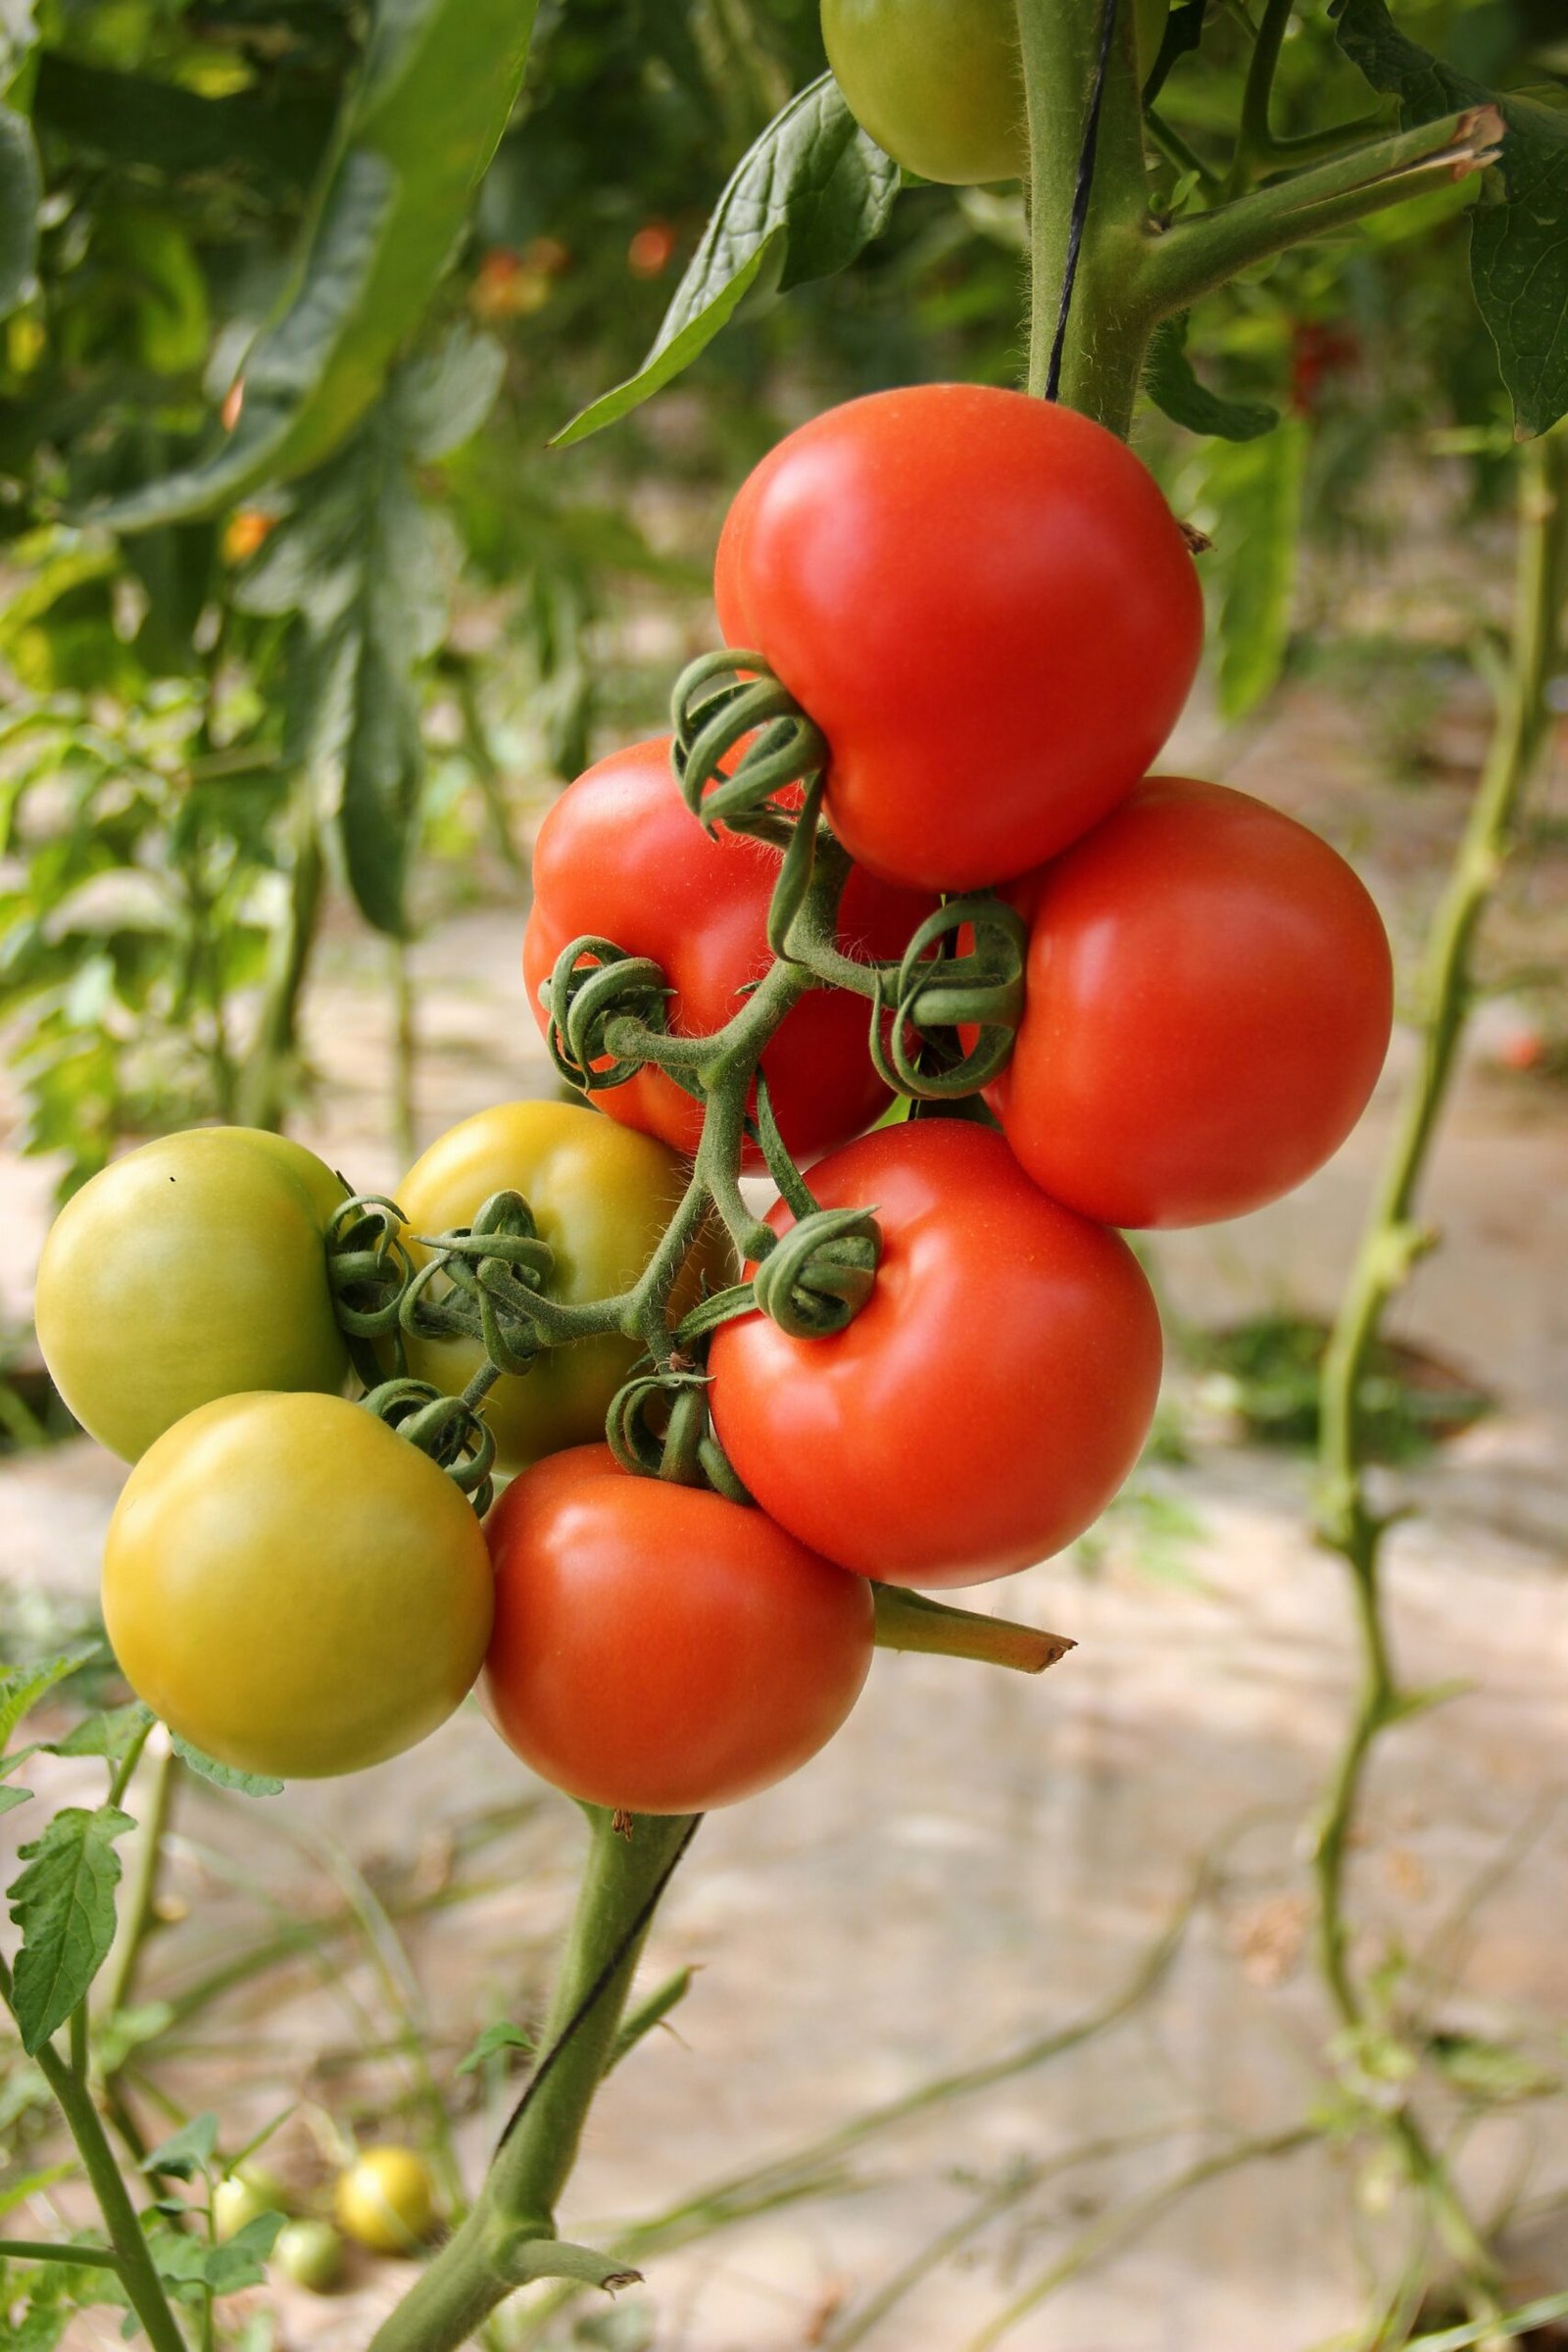 Can You Prune Tomato Plants? A Guide to Proper Tomato Plant Pruning